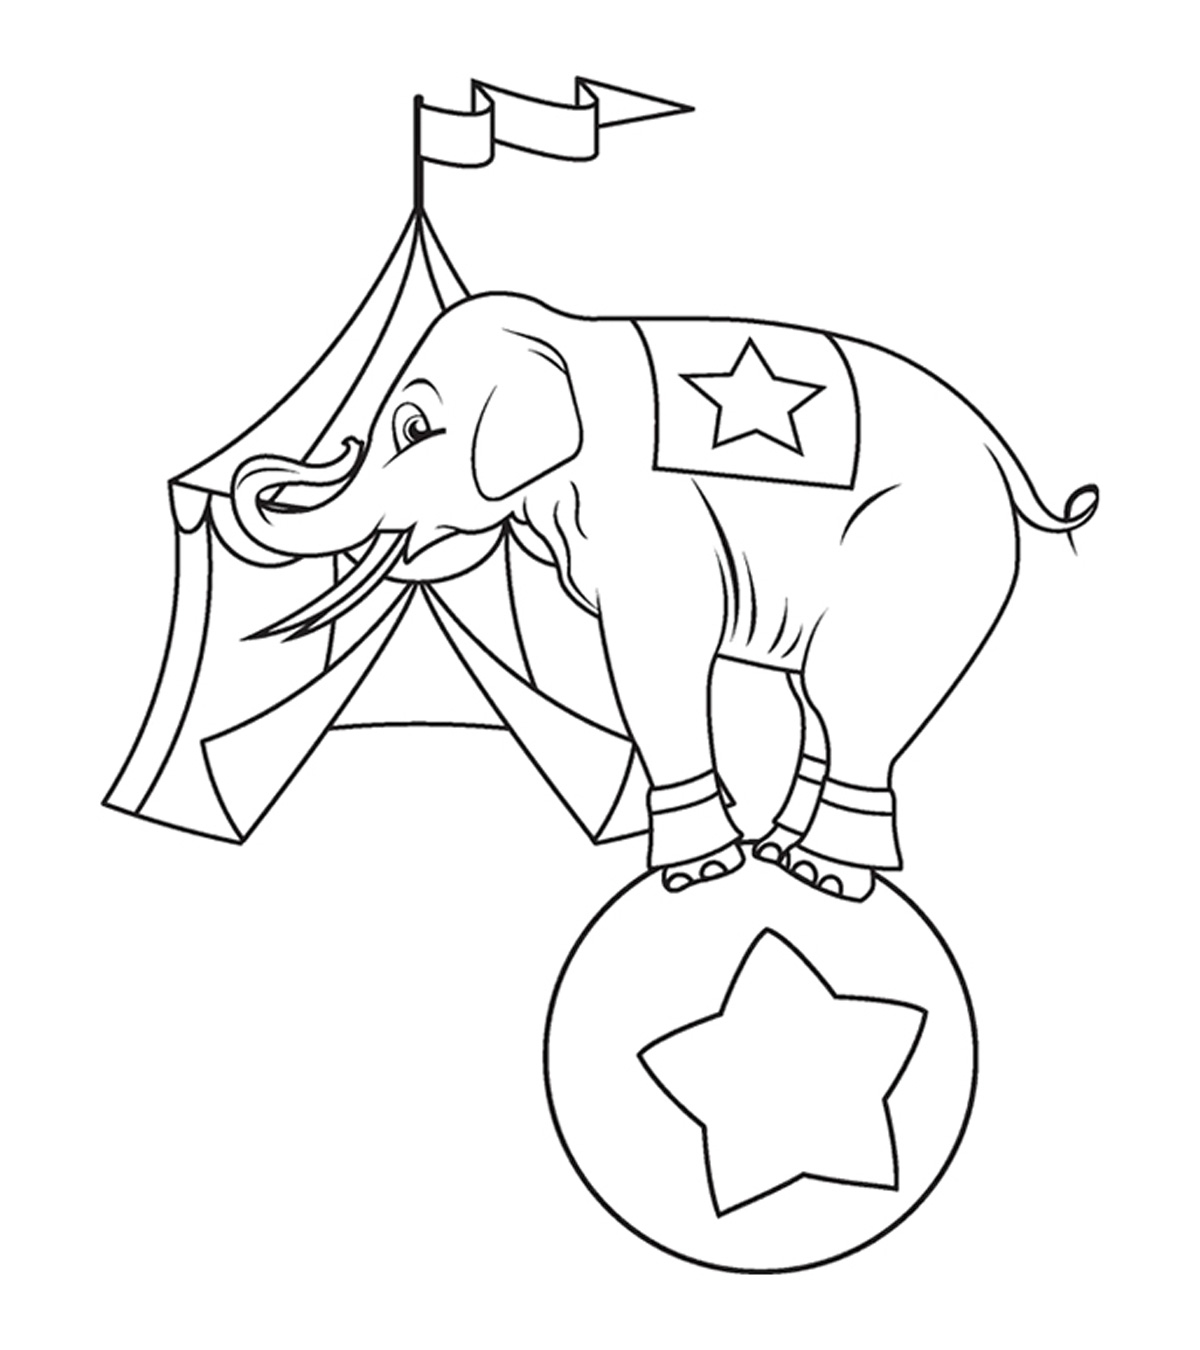 740 Top Colouring Book Pages Elephant Images & Pictures In HD